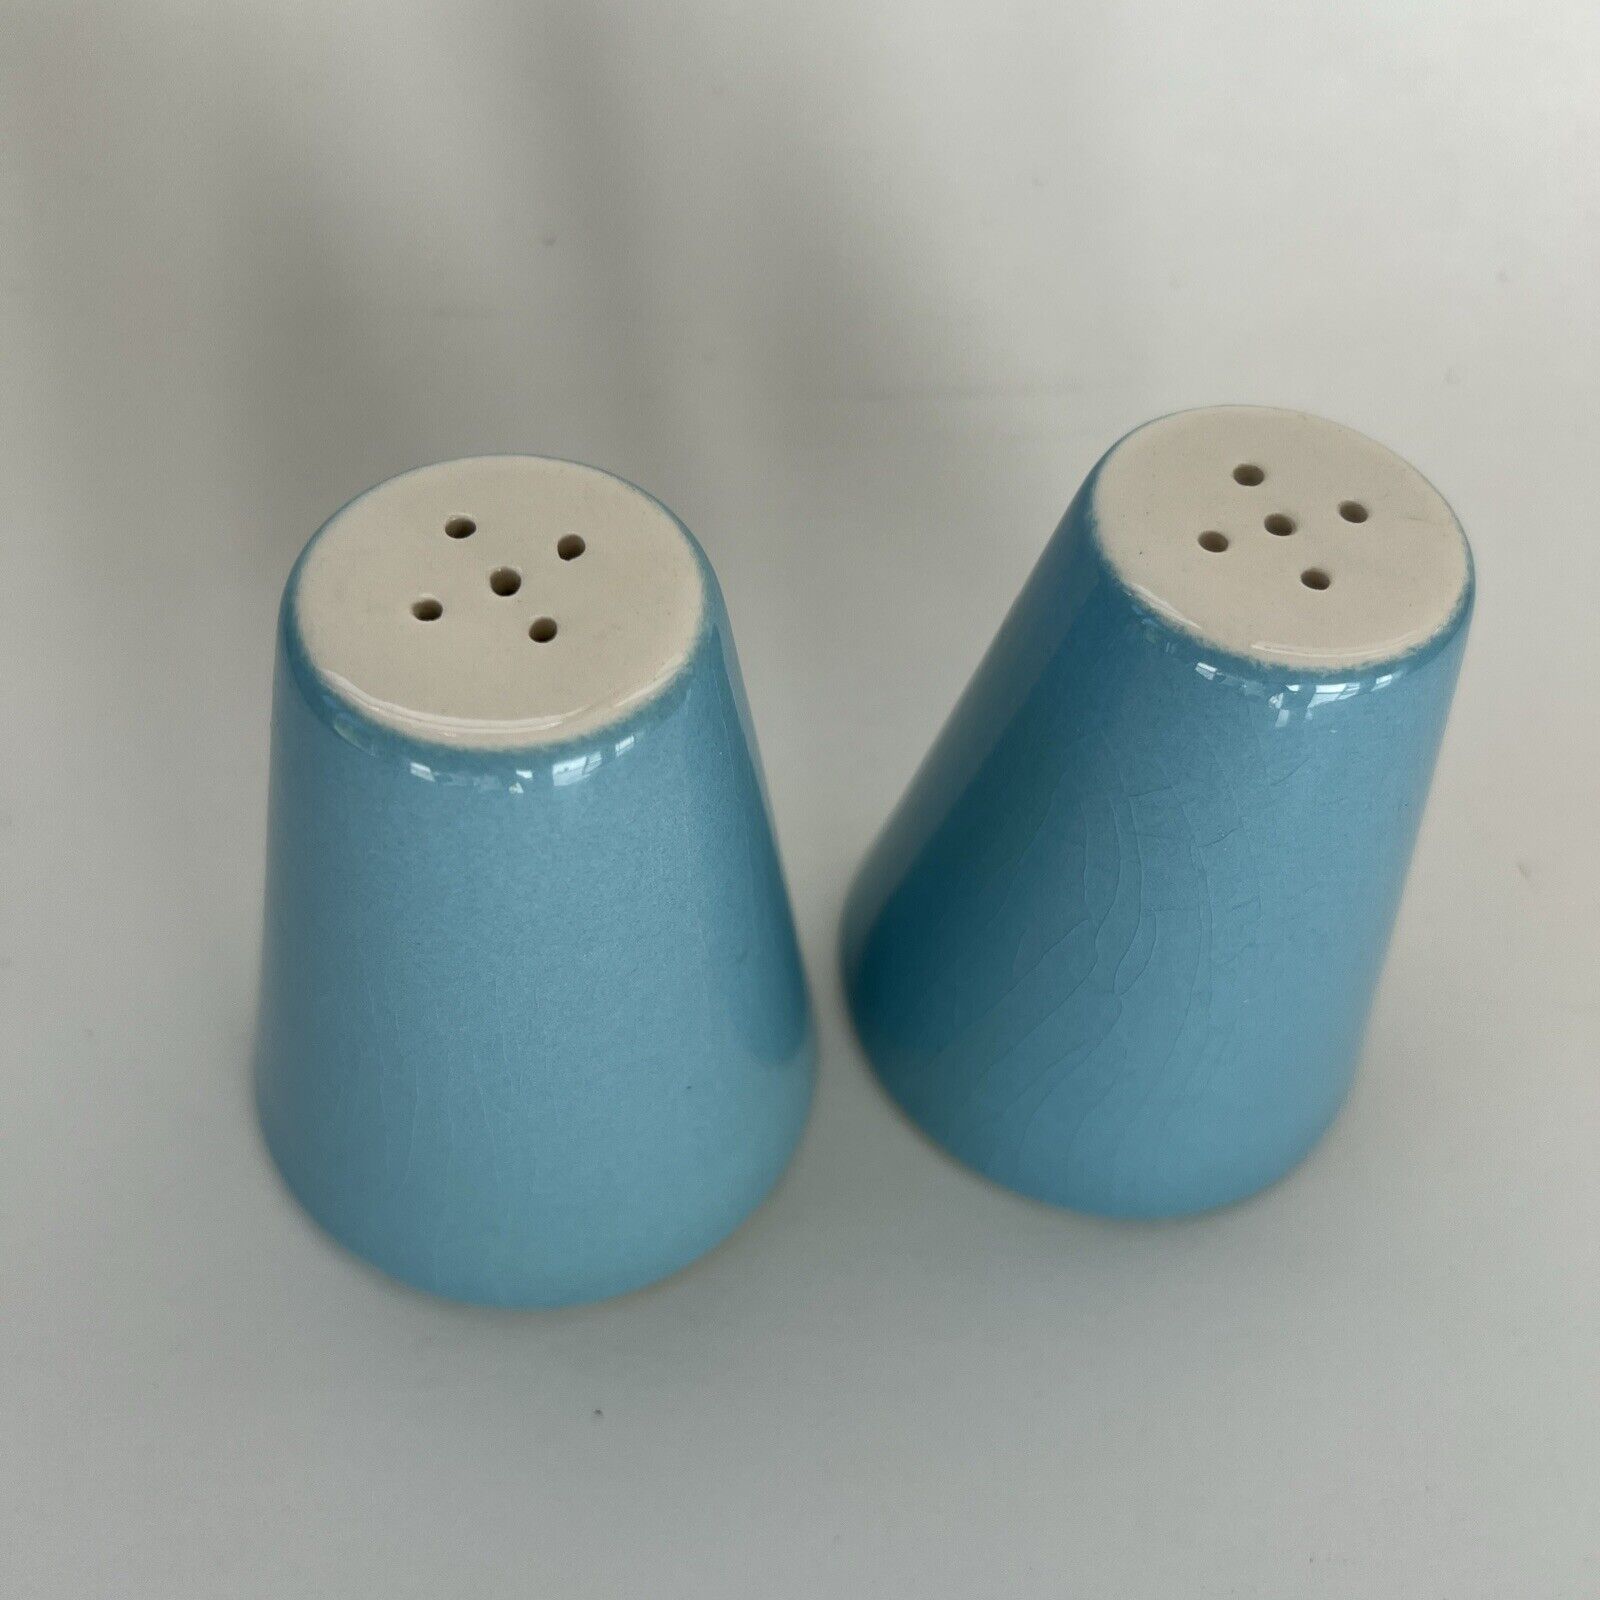 Vintage Mar-Crest Swiss Chalet Alpine Salt & Pepper Shakers Turquoise and White